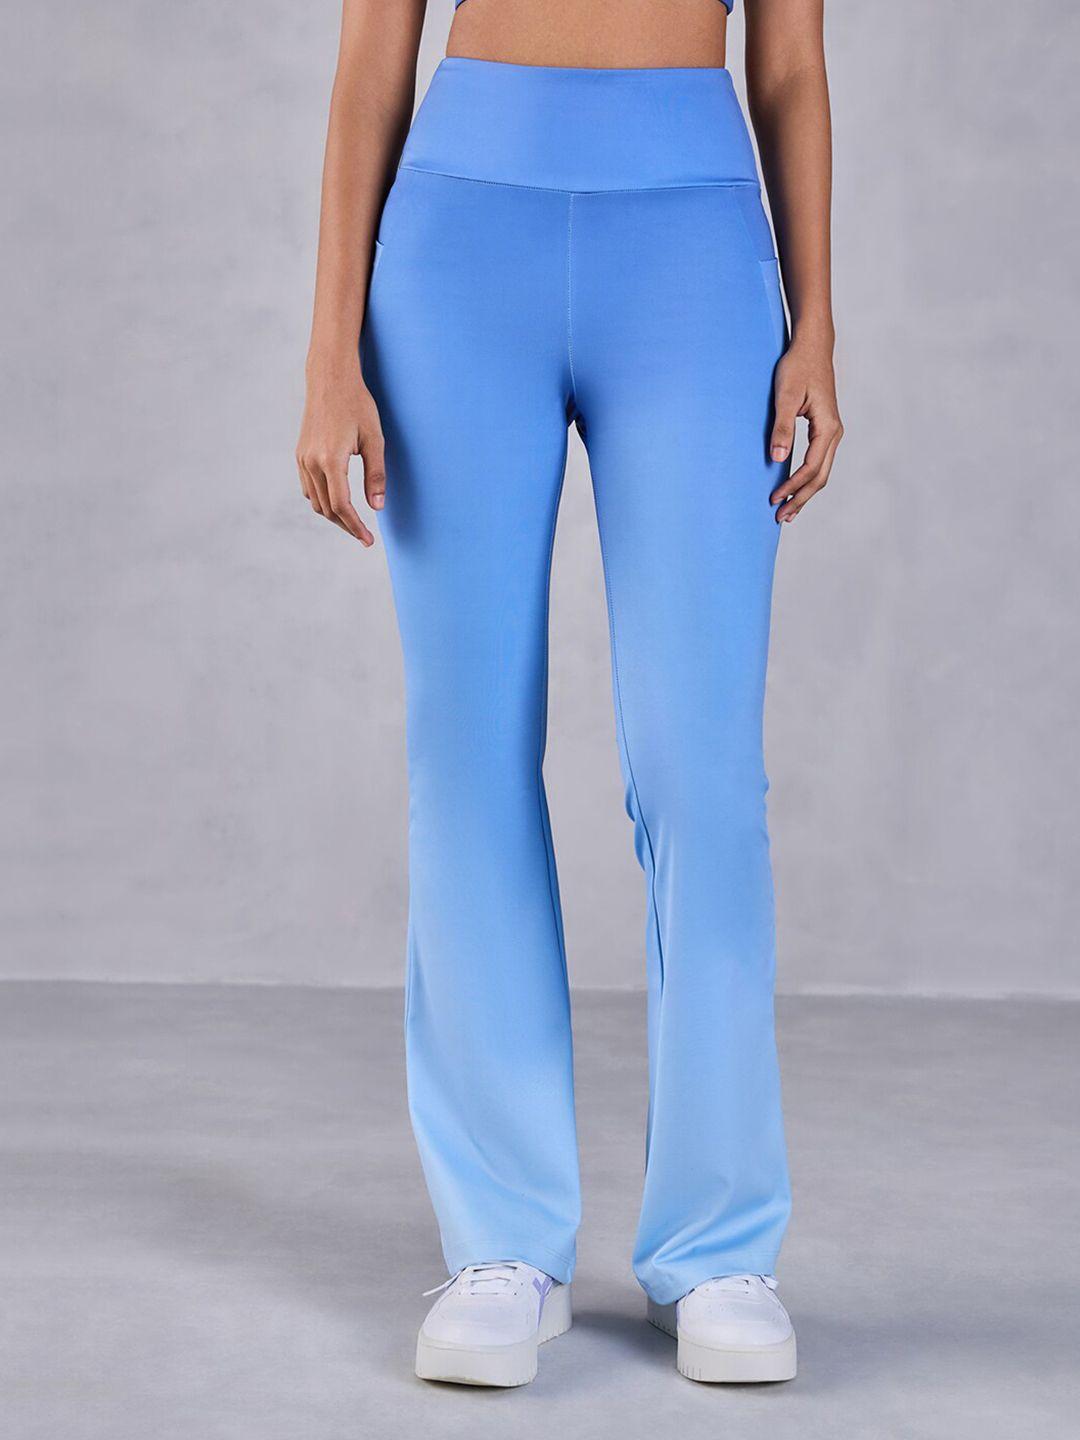 kica-winter-collection-women-high-rise-ombre-flare-track-pants